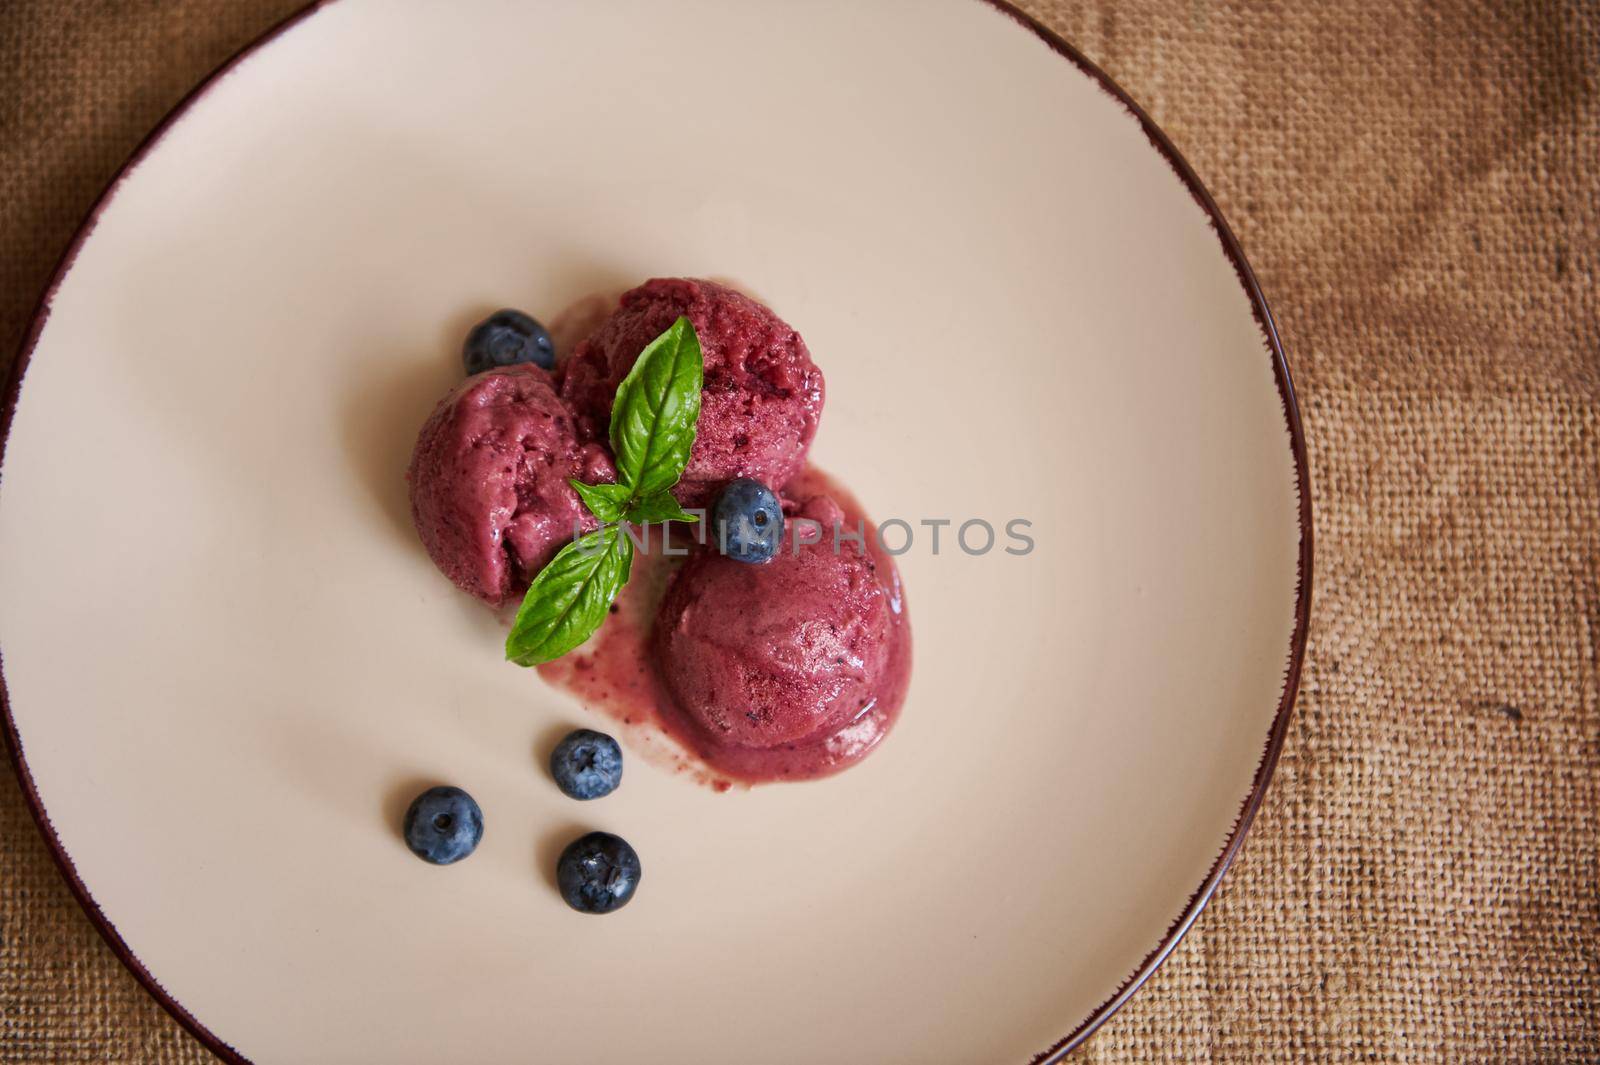 Flat lay. Tasty, vegan sorbet. Homemade huckleberry ice cream, topped with organic blueberries and green leaf of lemon basil. Tree frozen balls of banana and berry on a beige plate. Healthy eating